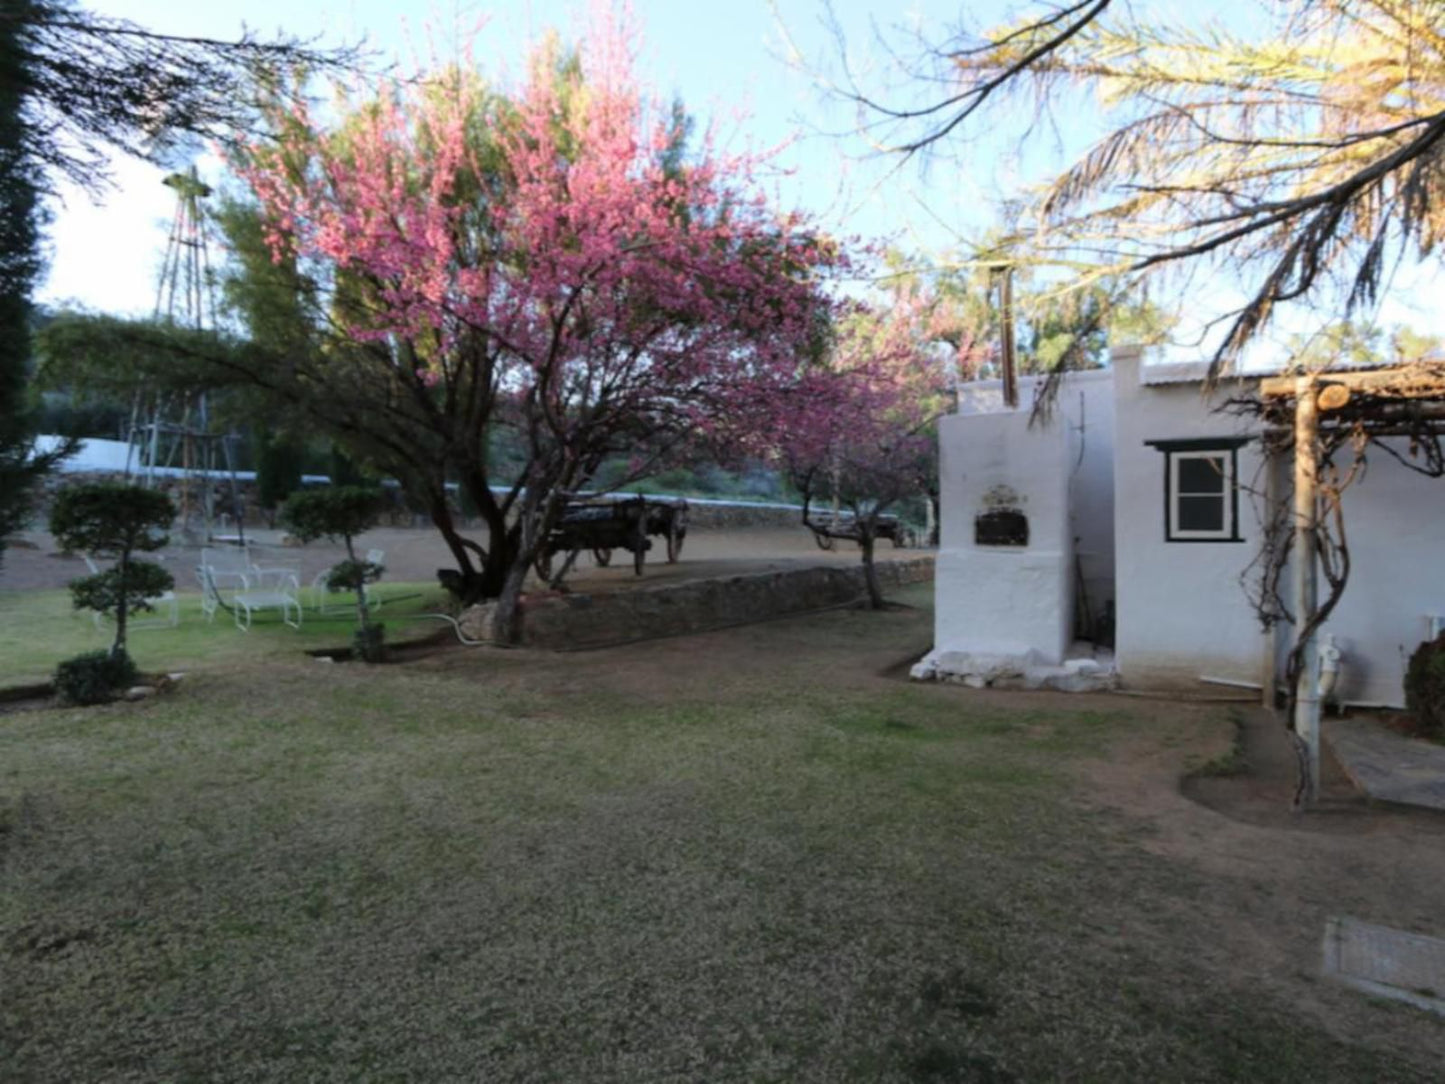 Letskraal Farm Accommodation Graaff Reinet Eastern Cape South Africa House, Building, Architecture, Cemetery, Religion, Grave